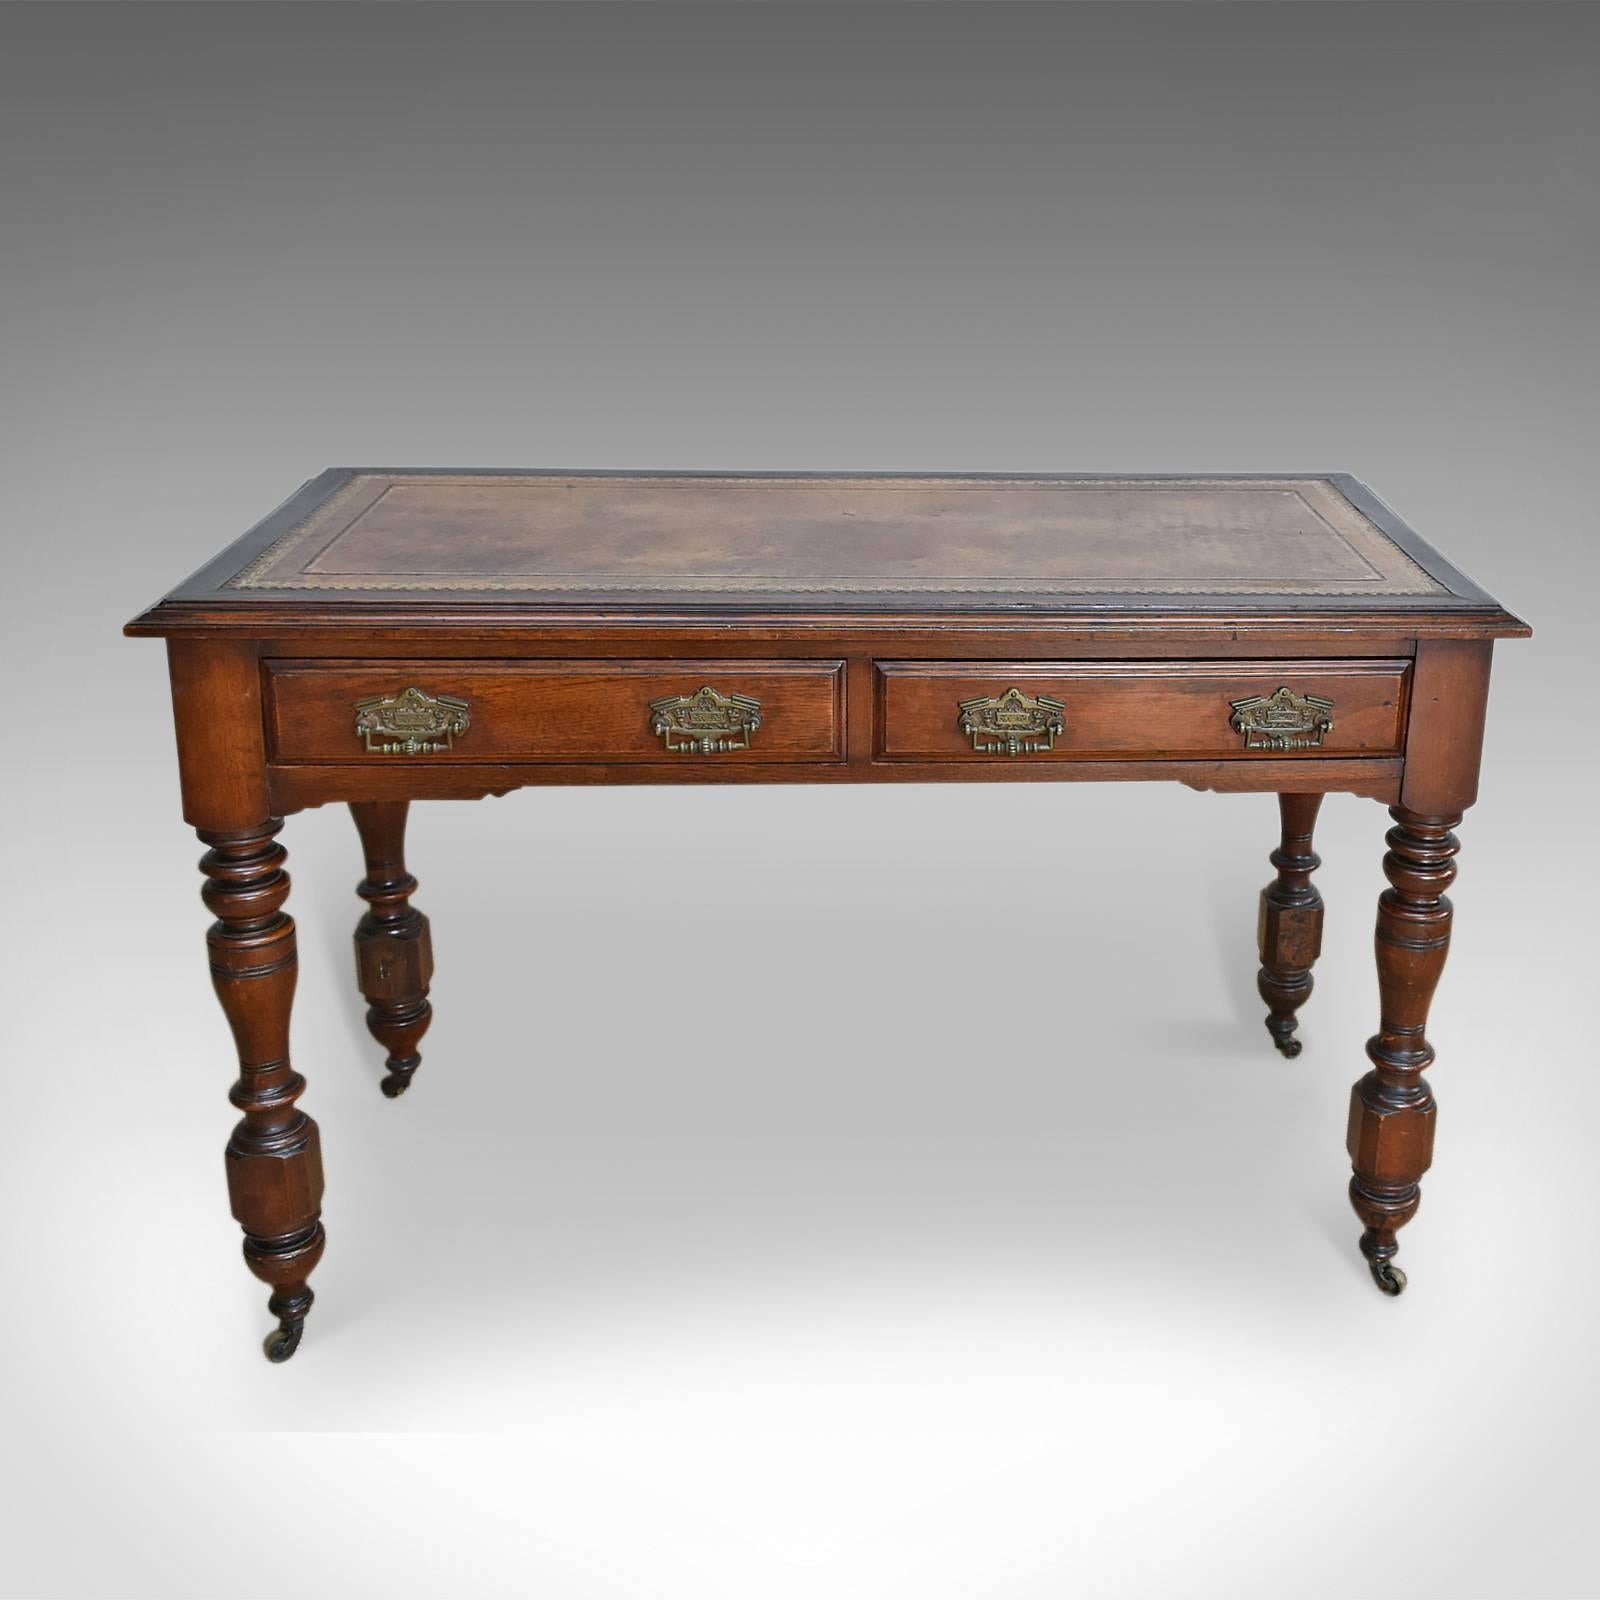 This is an attractive antique desk/late Victorian writing table dating to the end of the 19th century, circa 1880.

Crafted in oak with good color and an aged patina
Inset tan leather skiver twin tooled in gold
Raised on stout, turned baluster